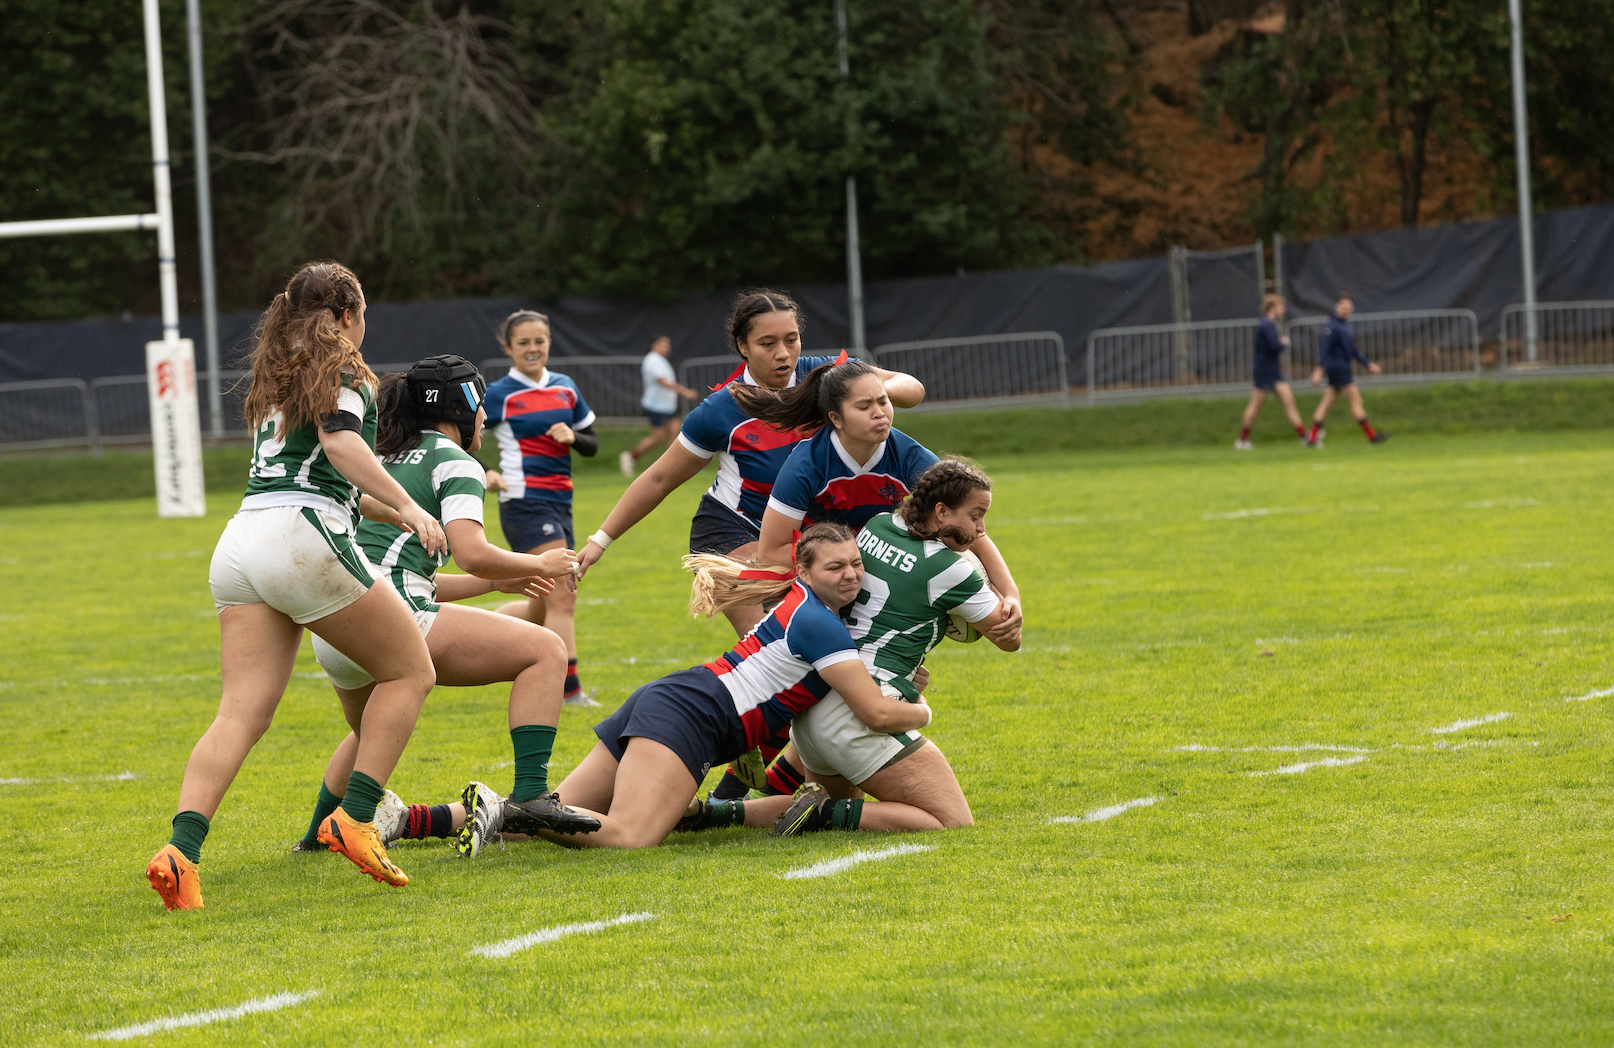 Tackle by SMC Player./ Photo by Rebecca Harper